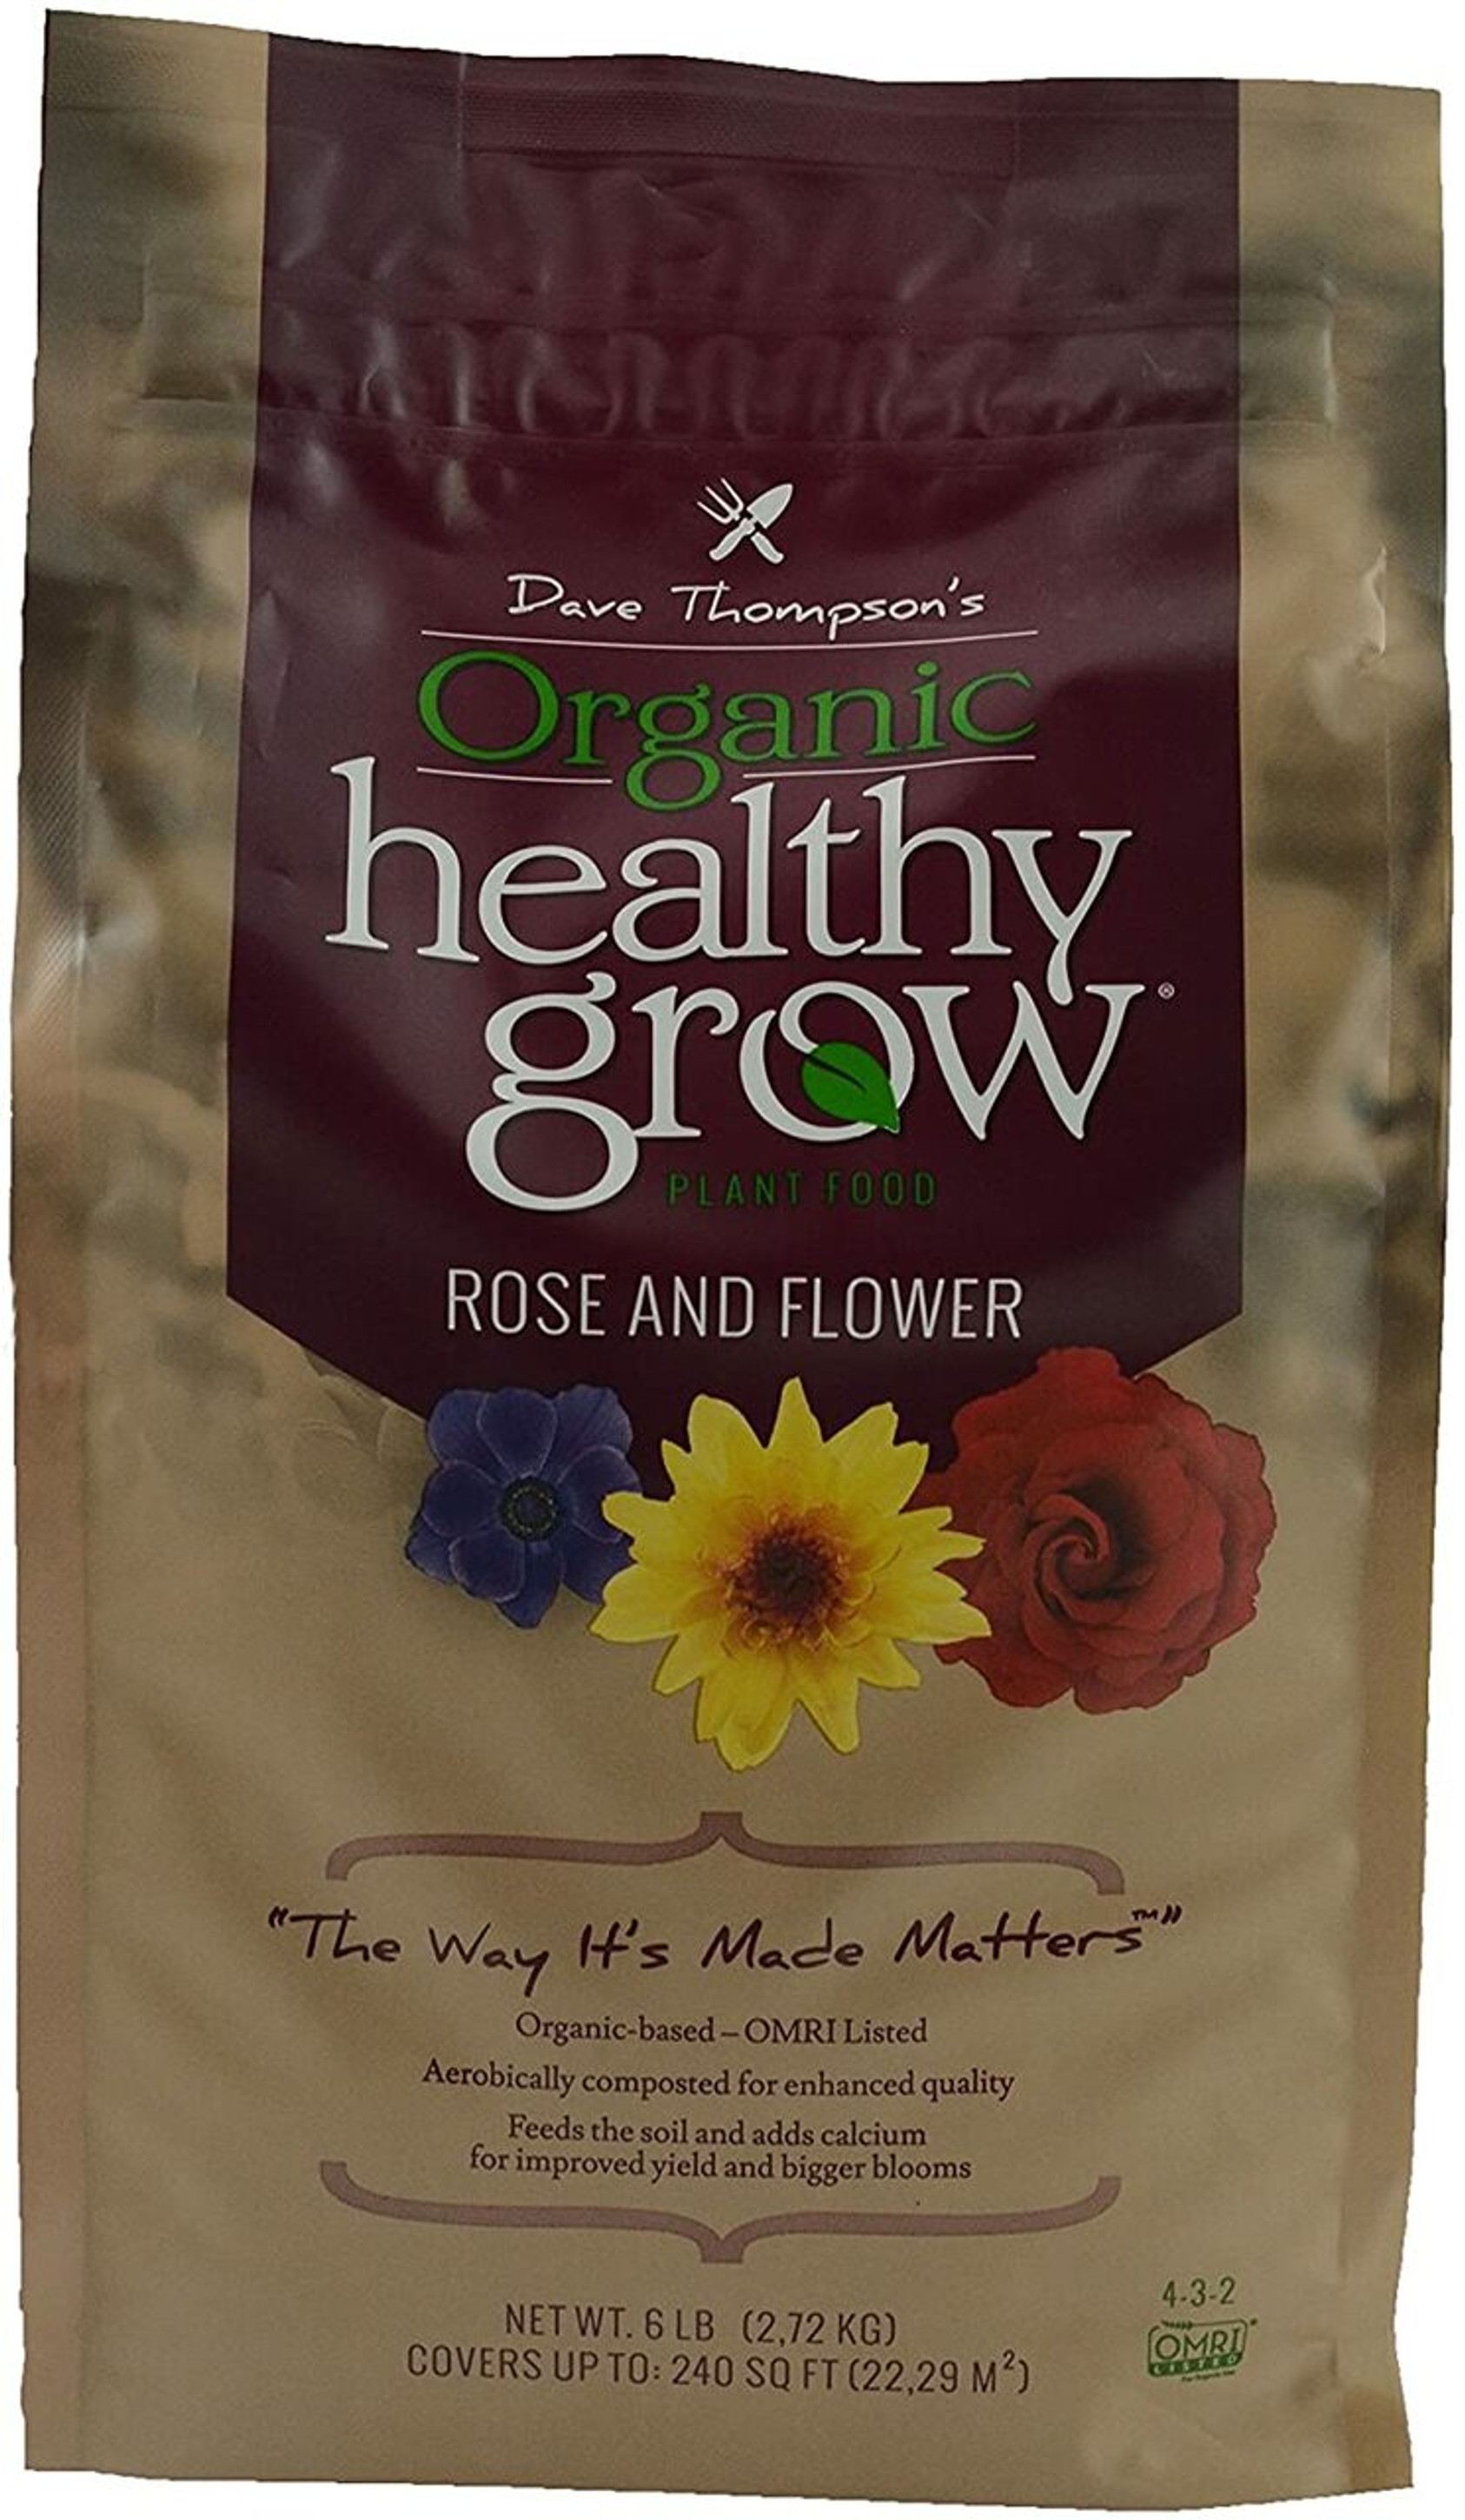 Dave Thompson's Organic Healthy Grow Rose and Flower Fertilizer, 6 lb